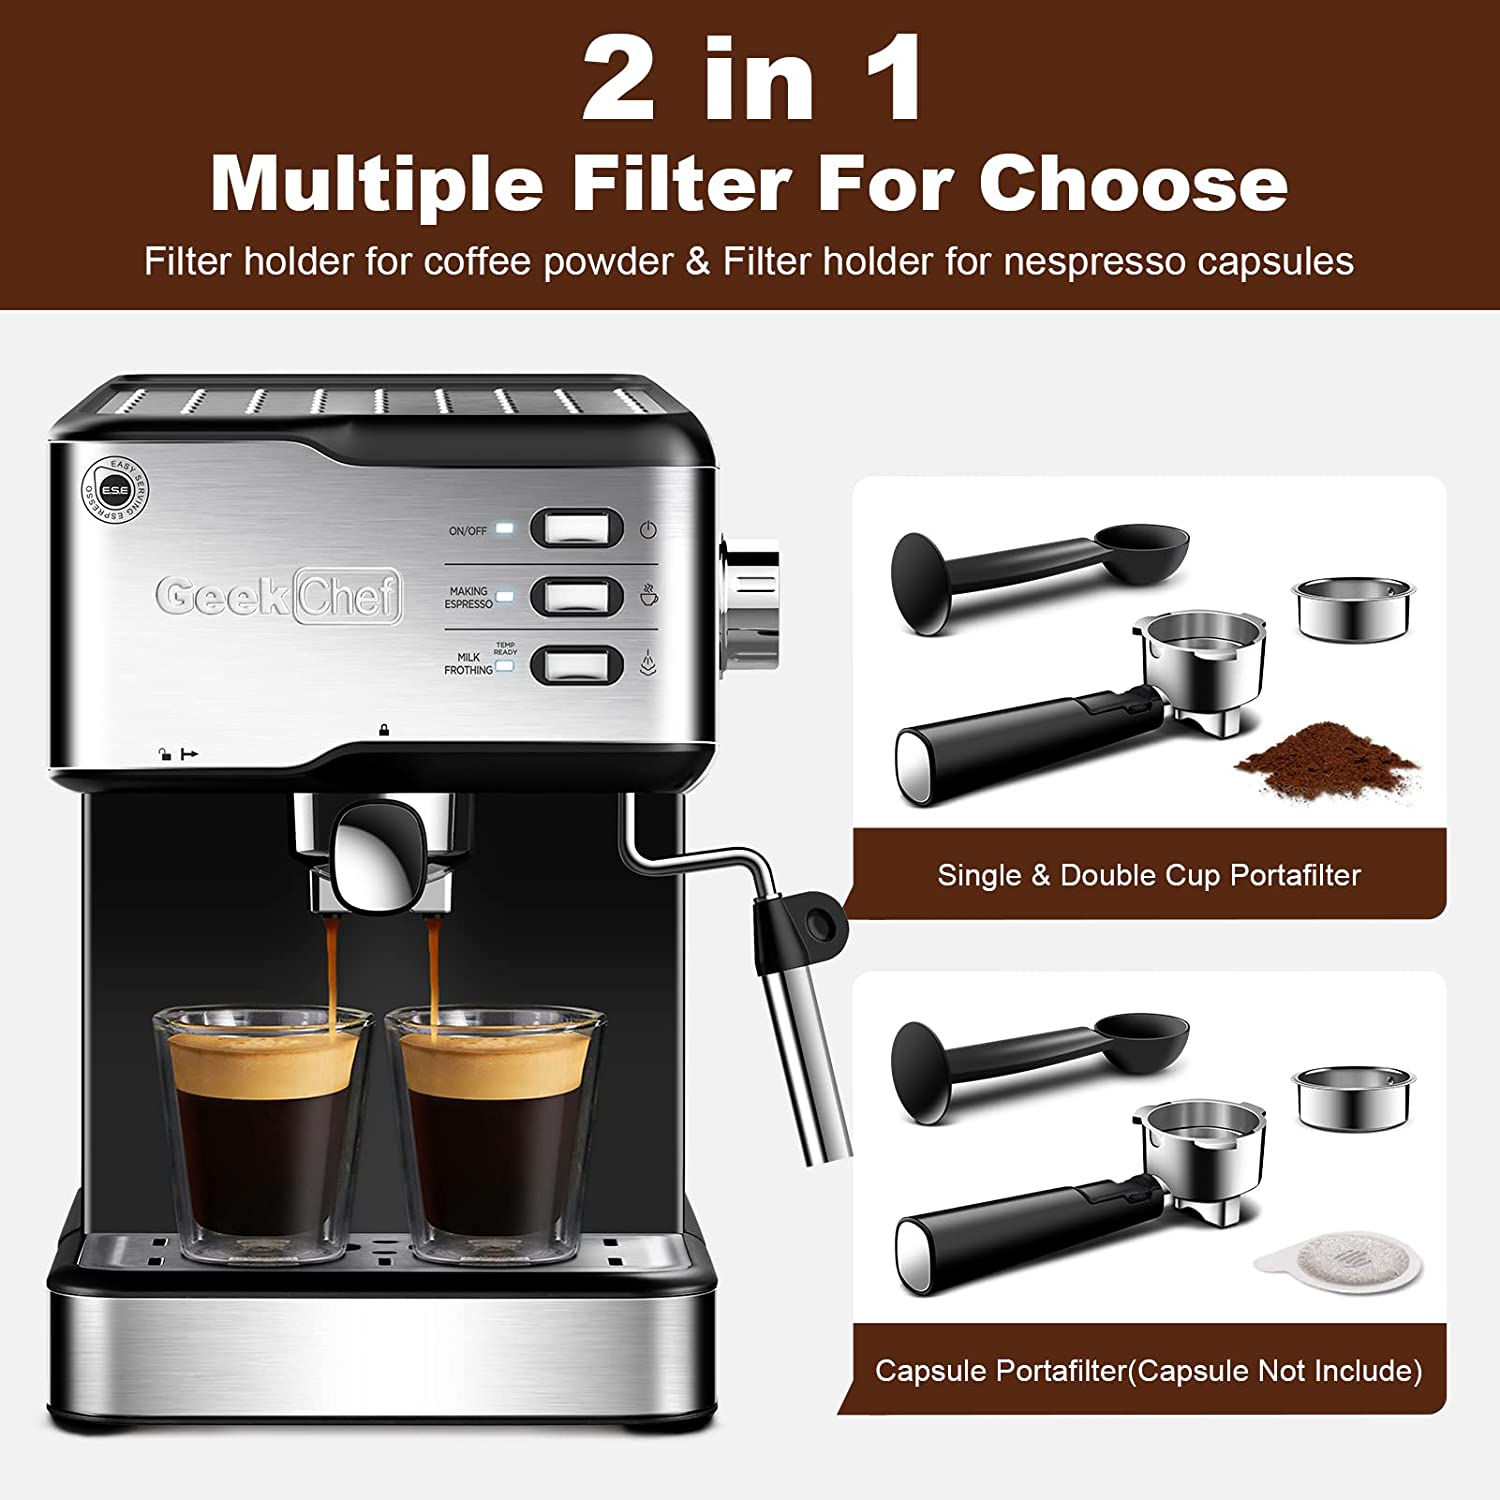  Commercial CHEF Coffee Maker, Drip Coffee Maker with